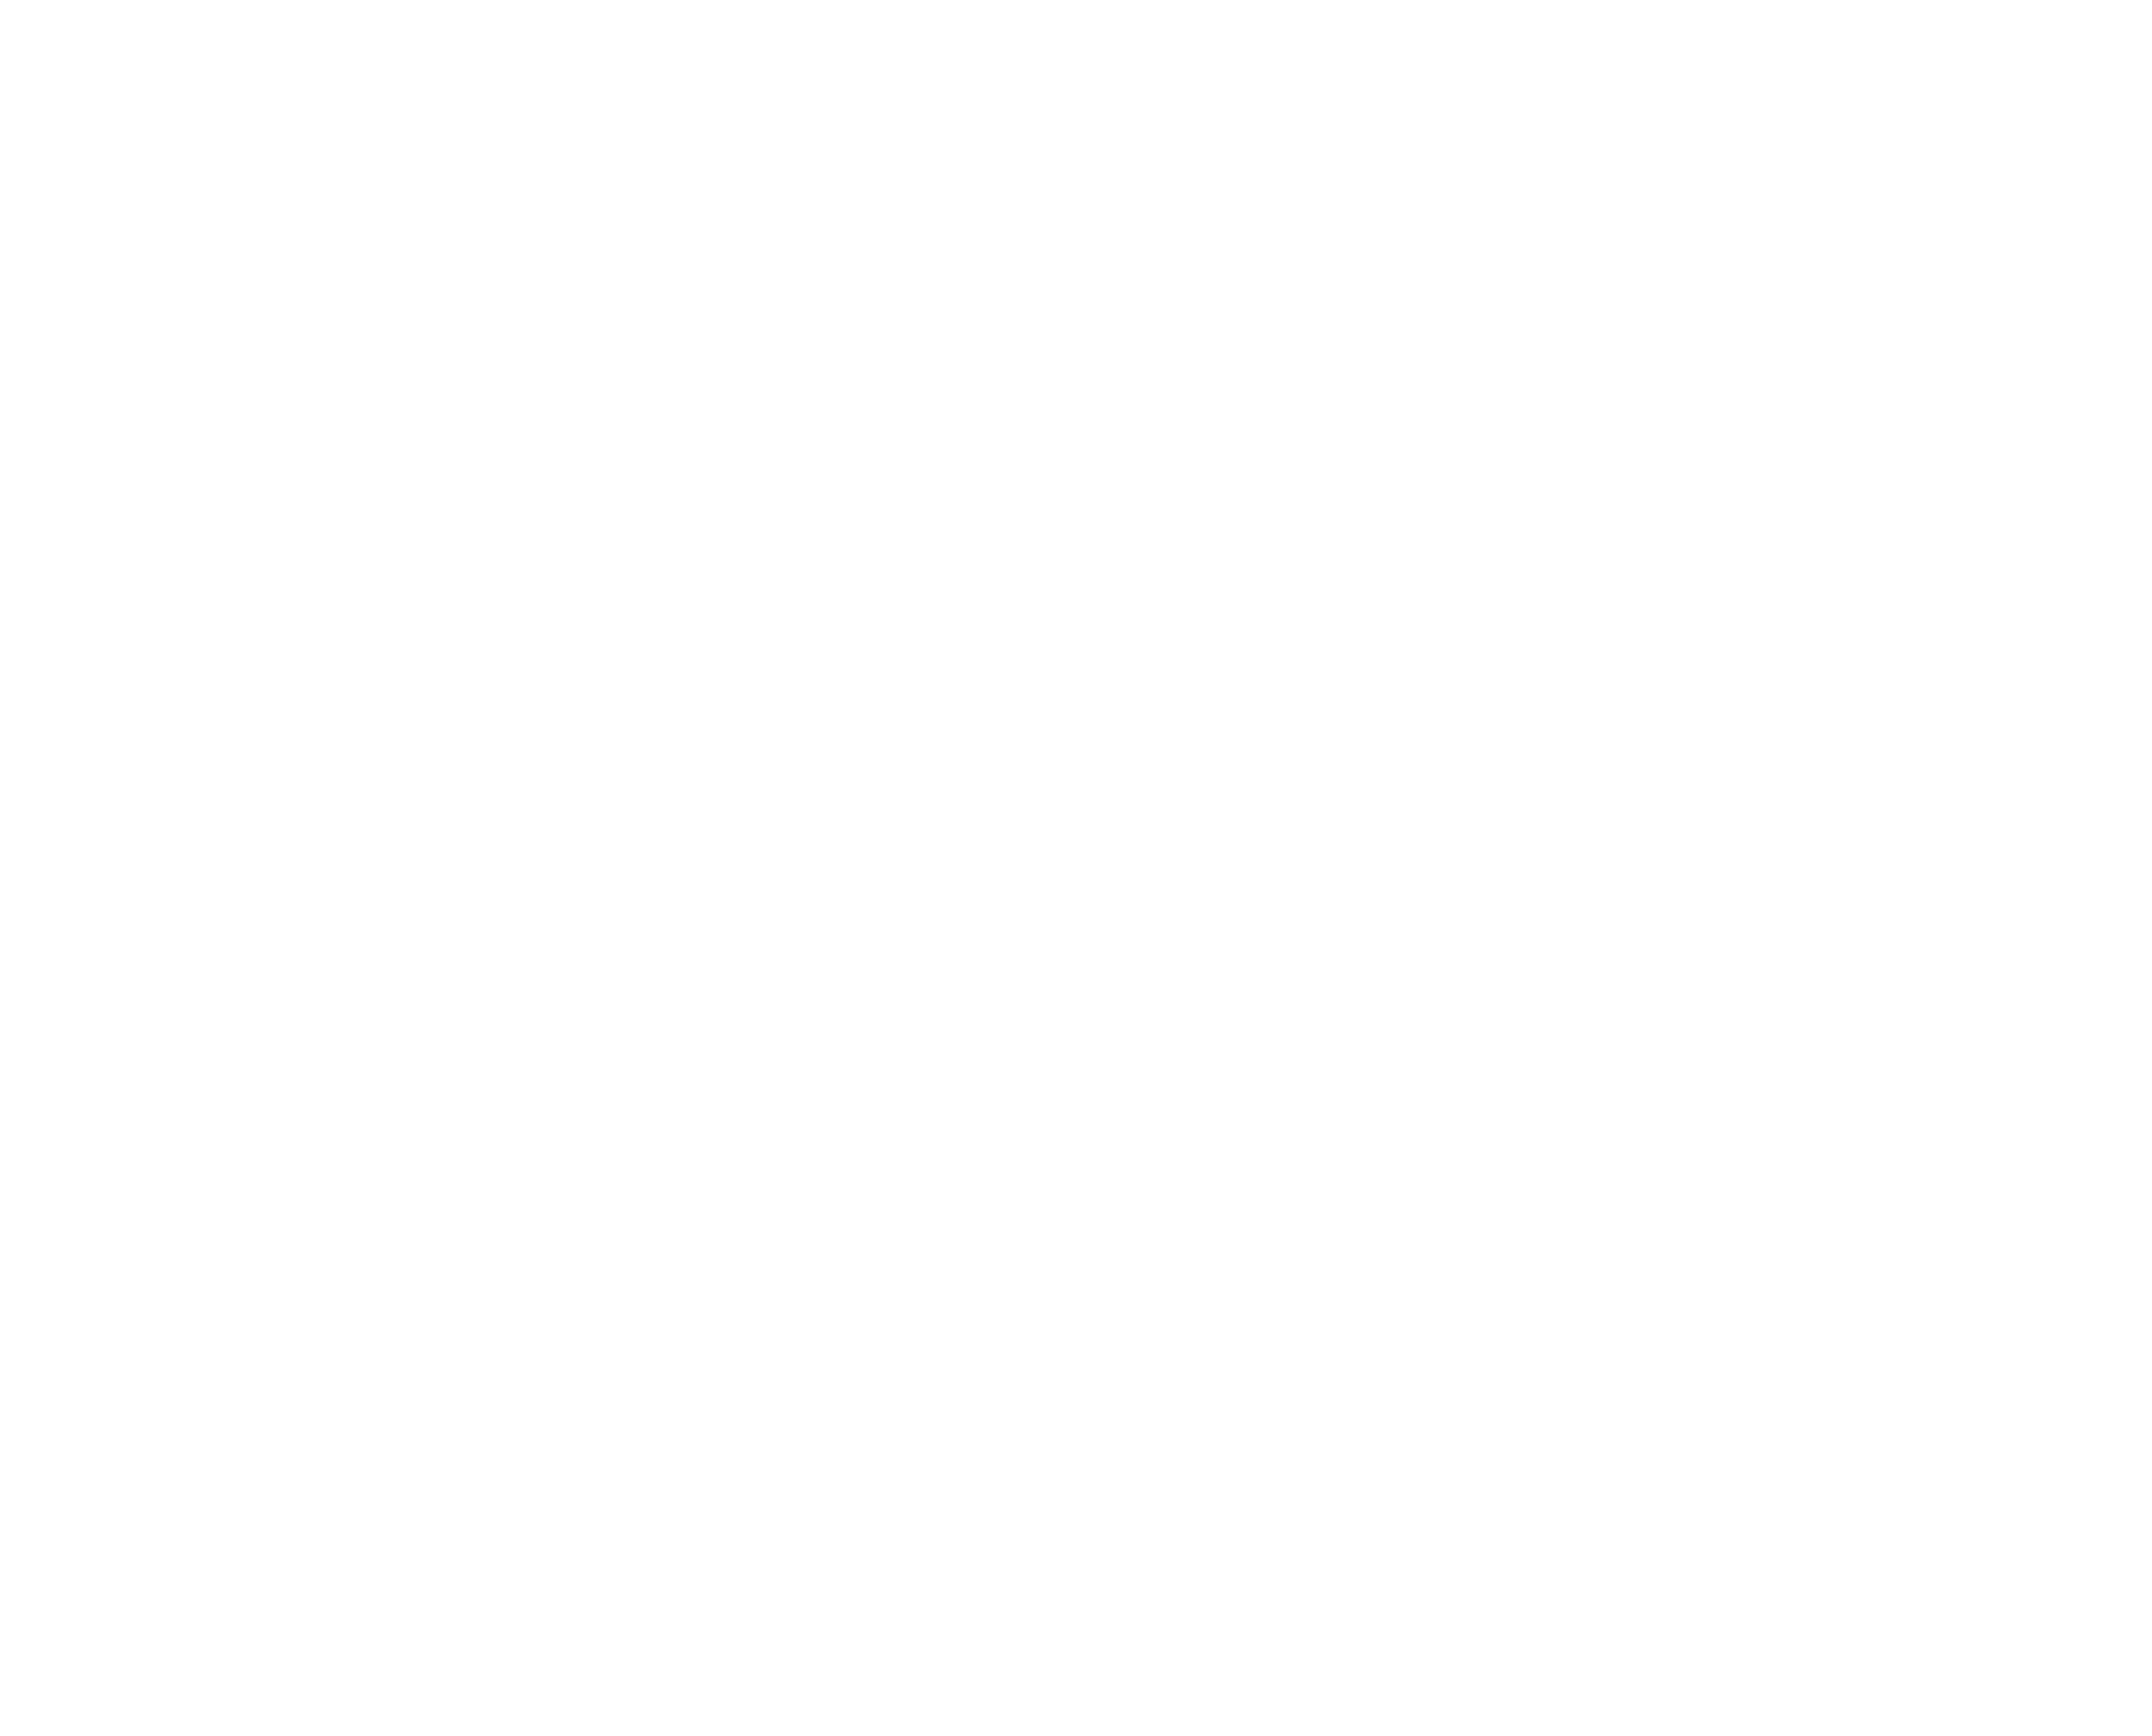 A3COM sous le label made in luxembourg